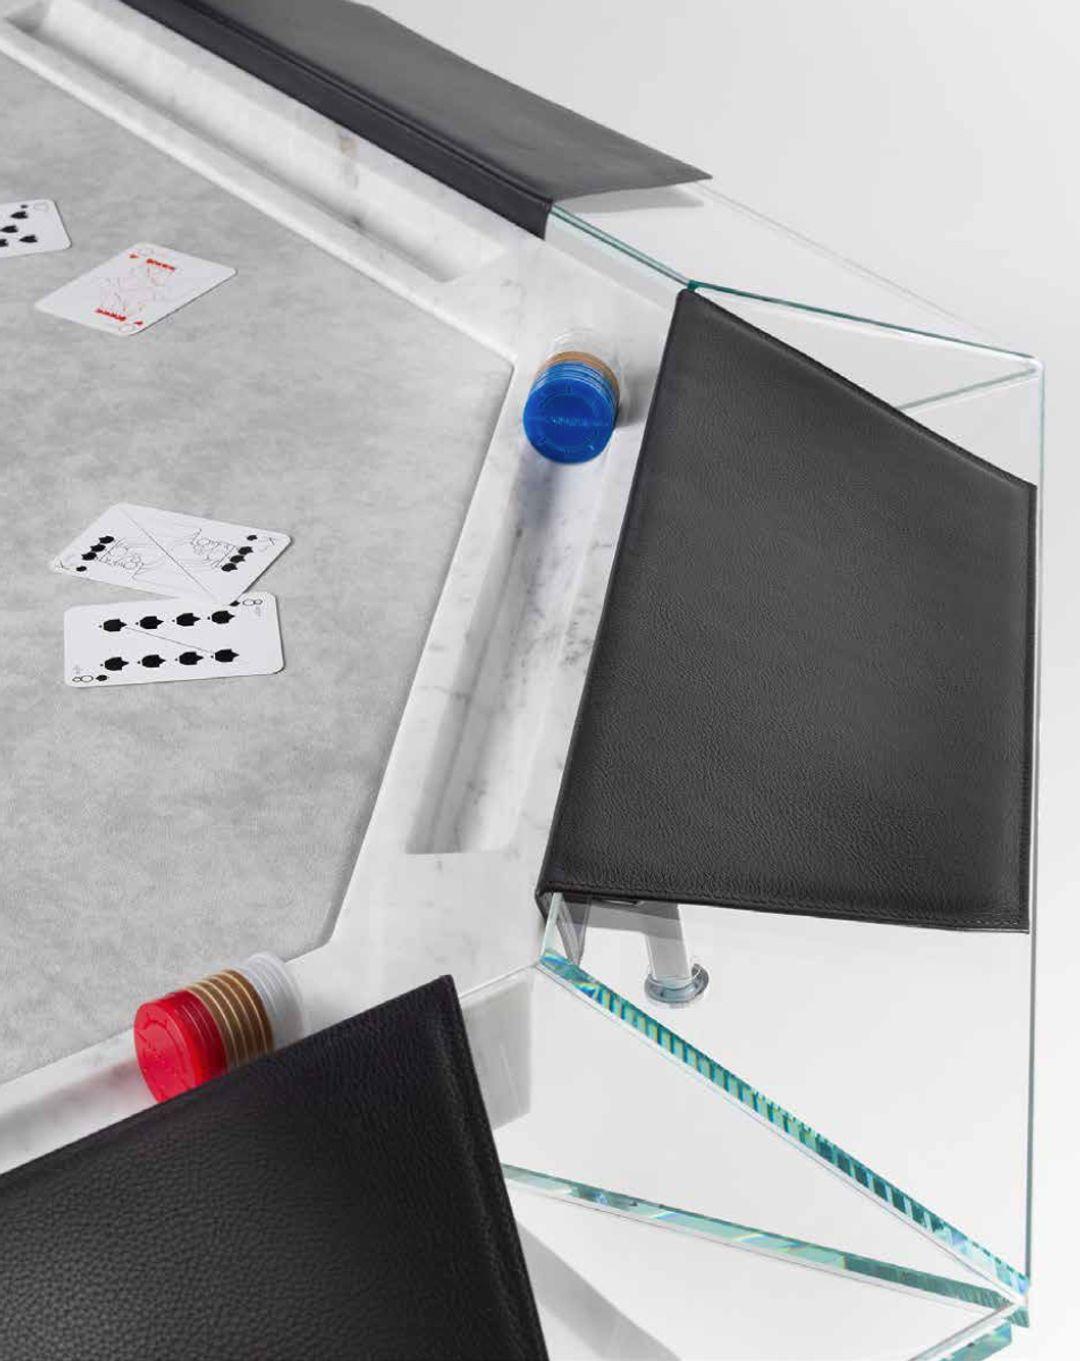 Impatia, an Italian luxury design company founded by architect Gregg Brodarick in 2012, specializes in customizing all kinds of luxury gaming tables for customers. Impatia reinterprets high-quality leisure life with iconic and avant-garde designs,